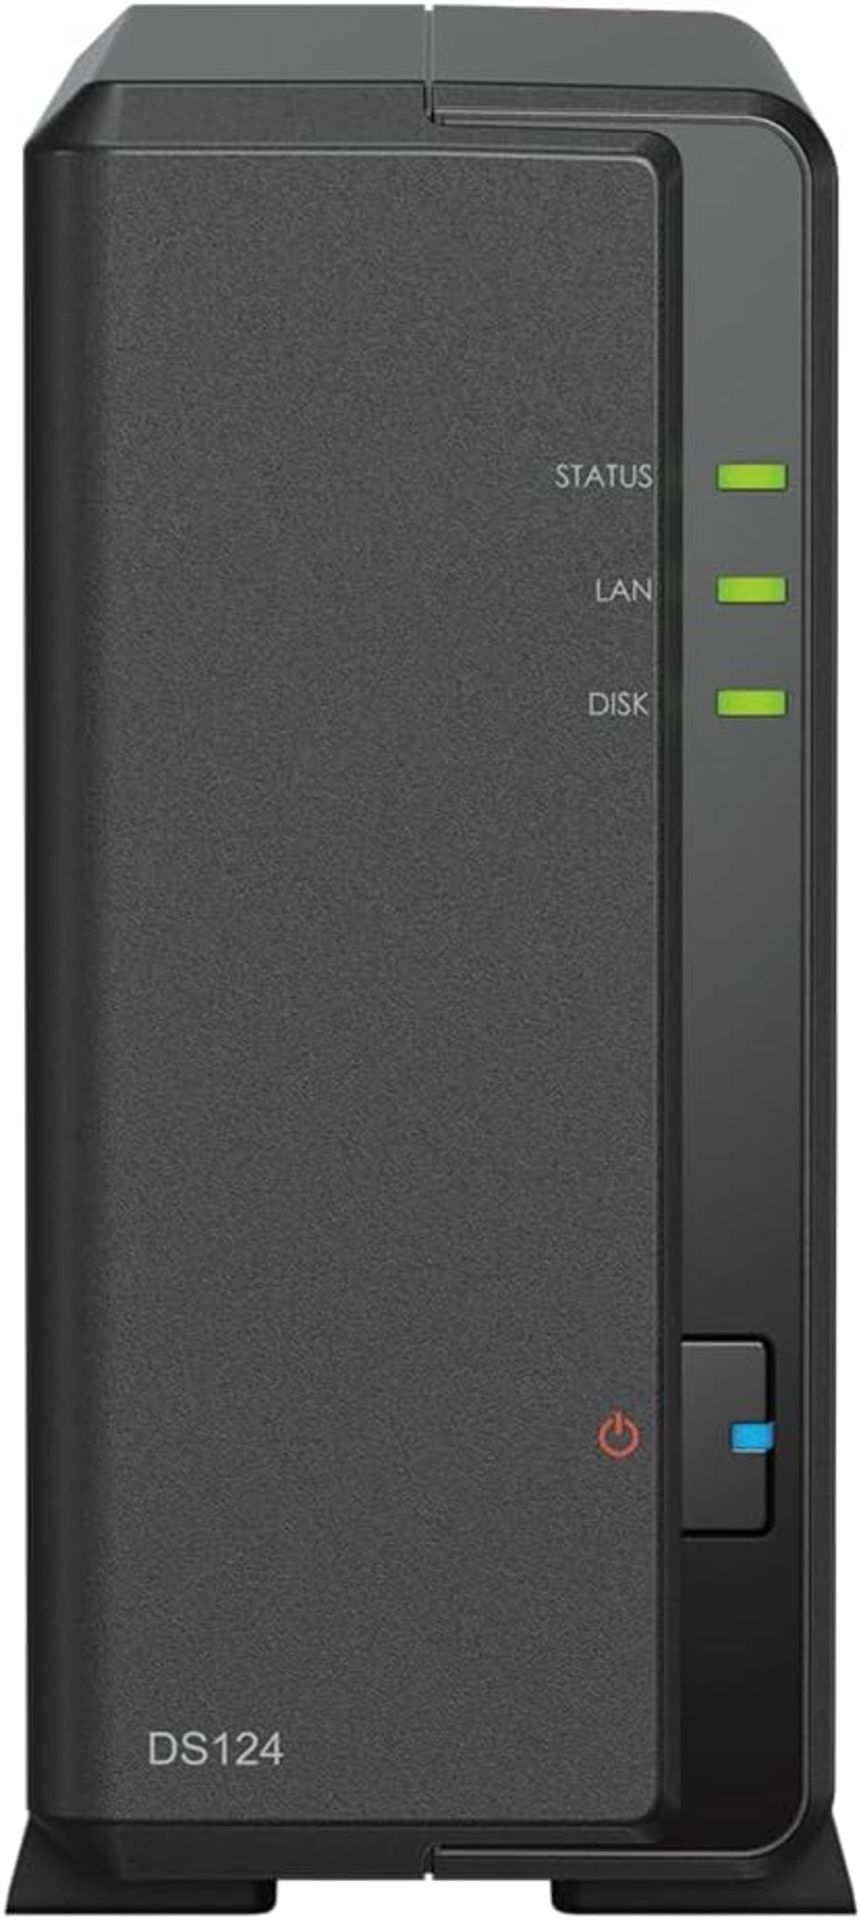 BRAND NEW SYNOLOGY DISKSTATION DS124 1 BAY NAS S/R - Image 2 of 3